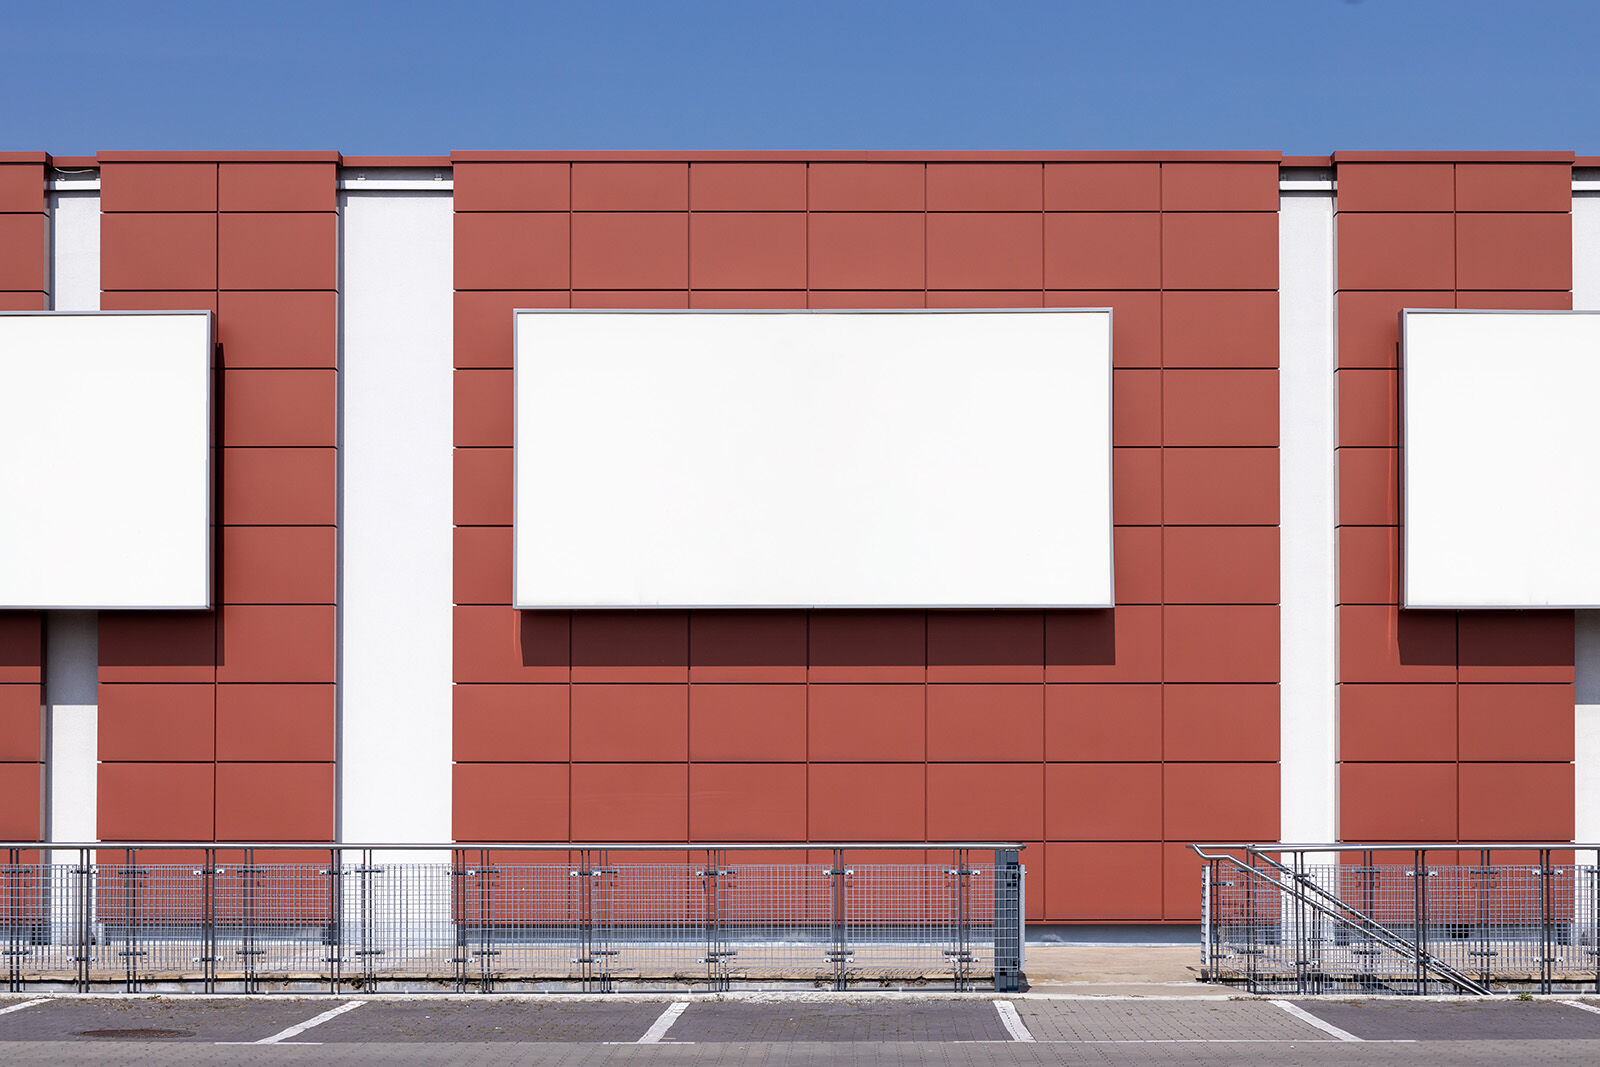 Front View 3 Horizontal Billboards on the Wall Mockup FREE PSD